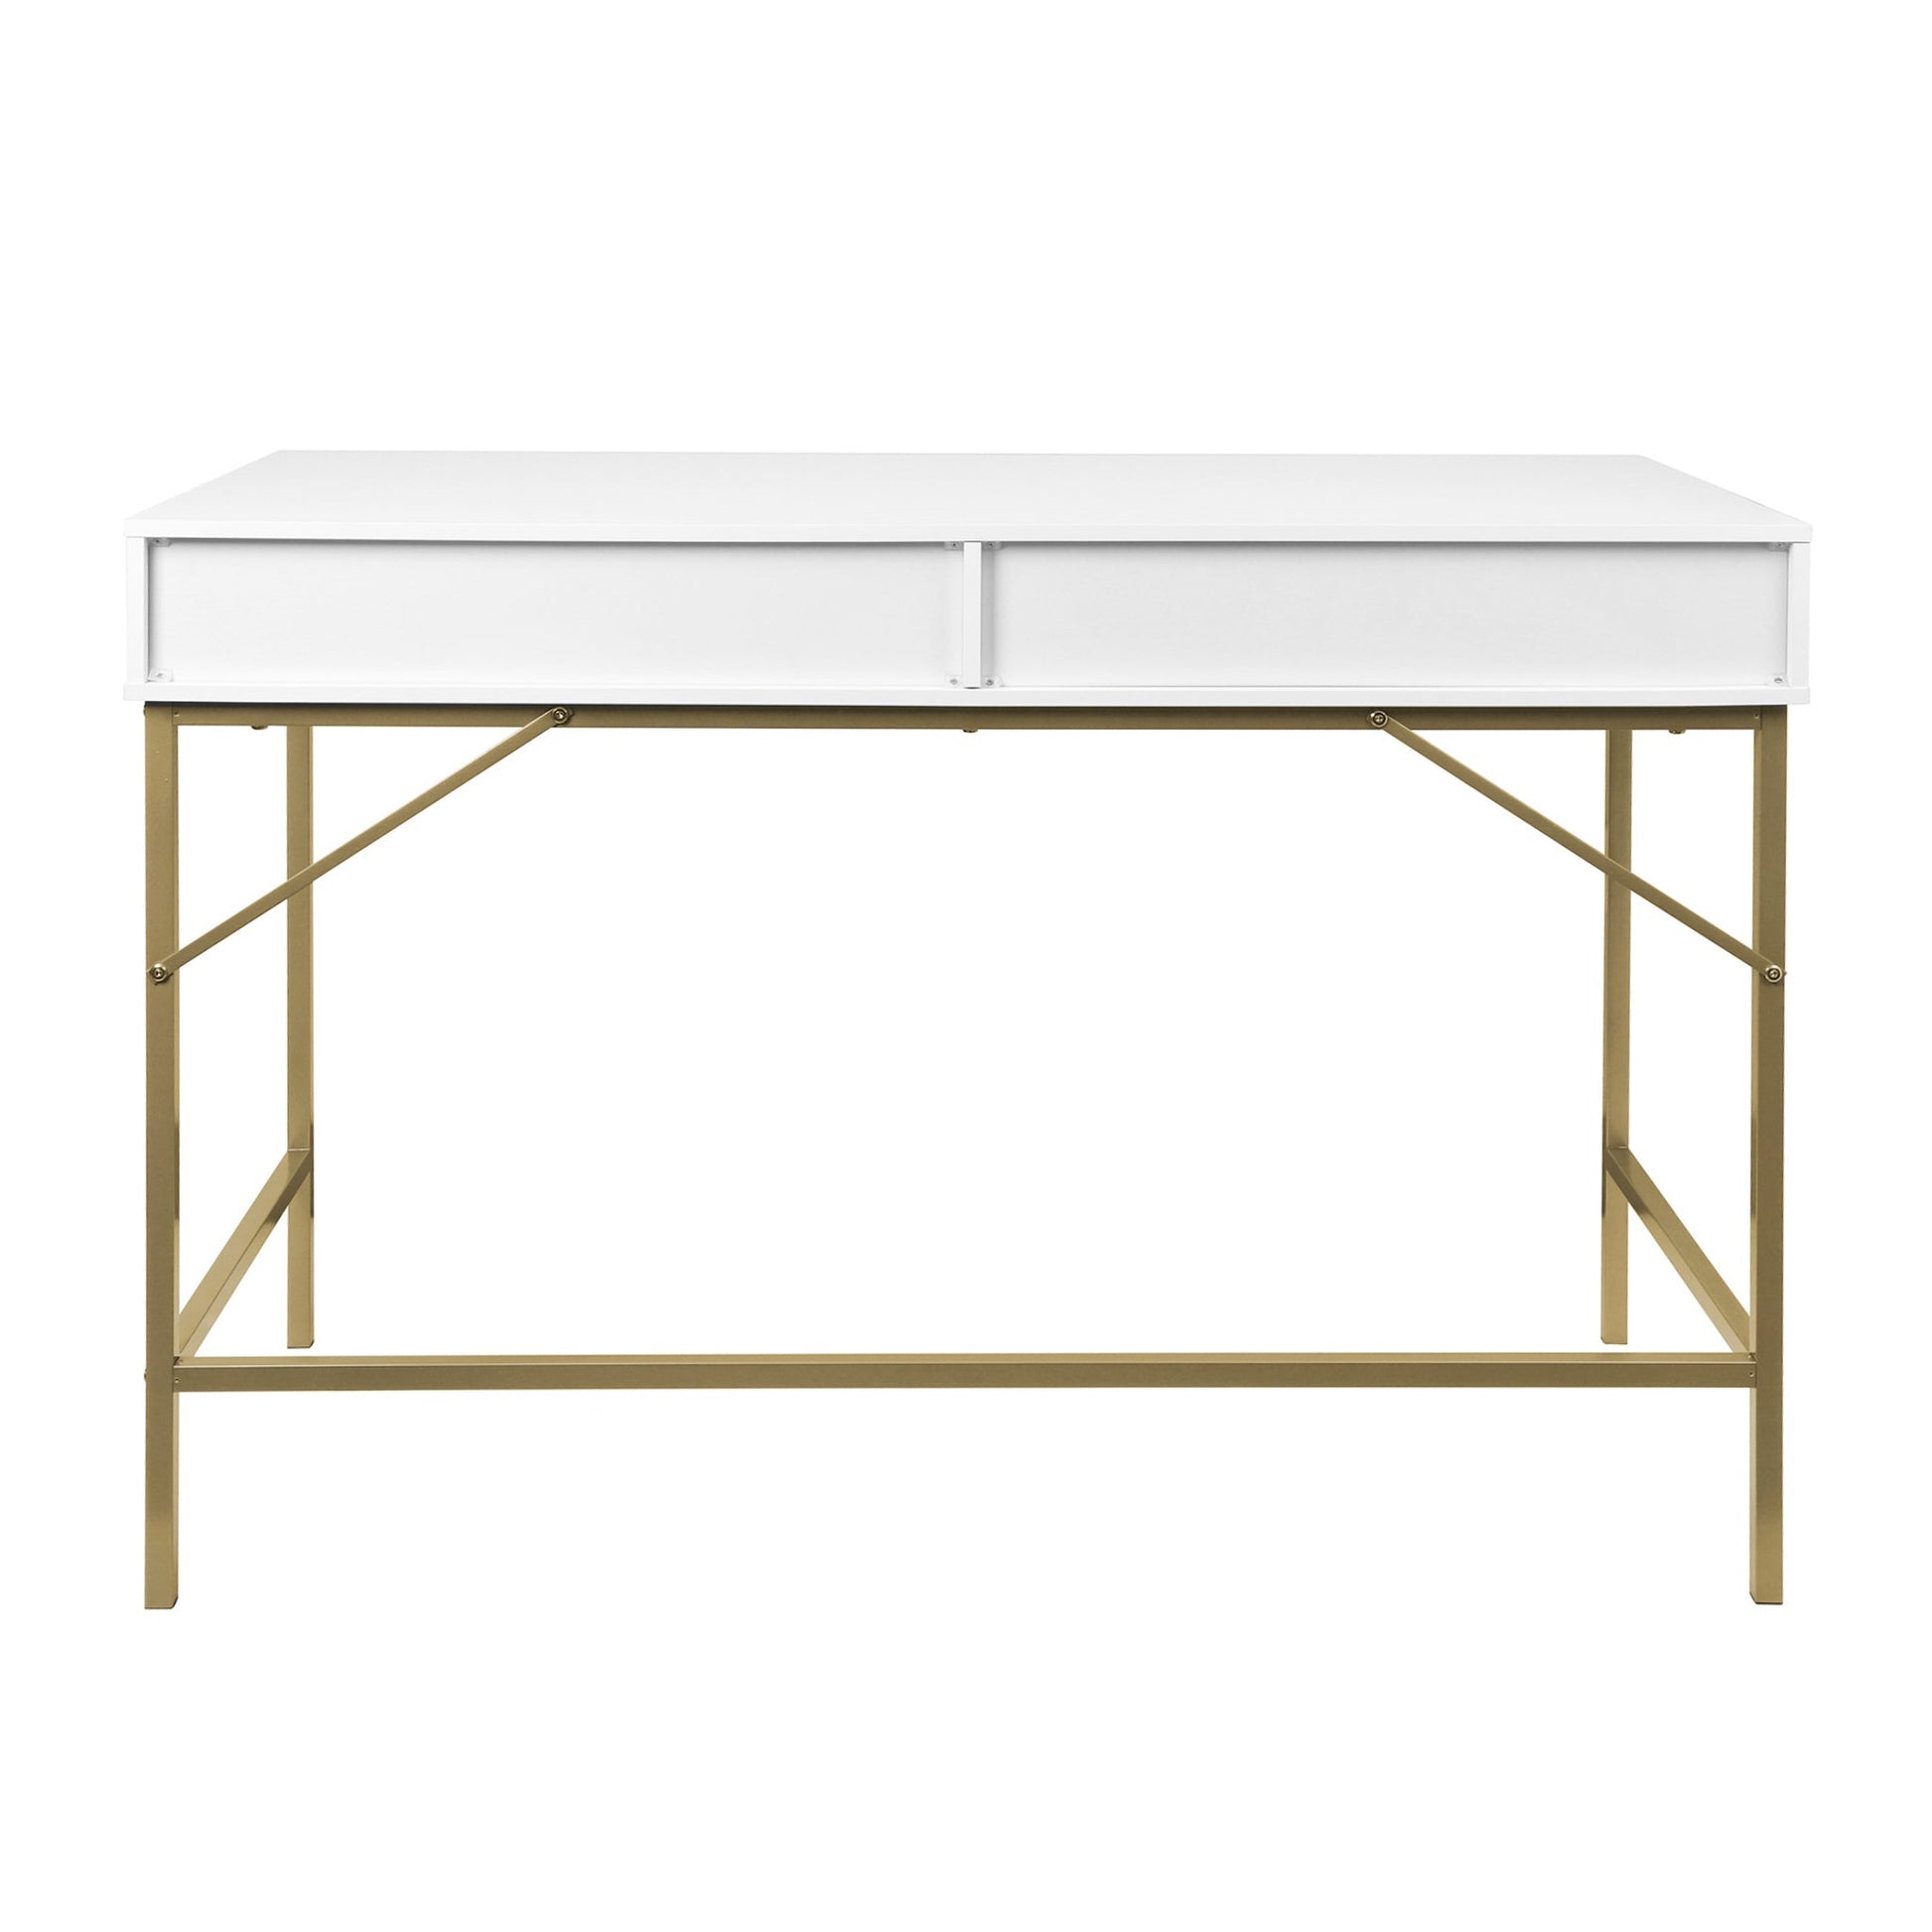 Marie dressing table and stool - white - Laura James